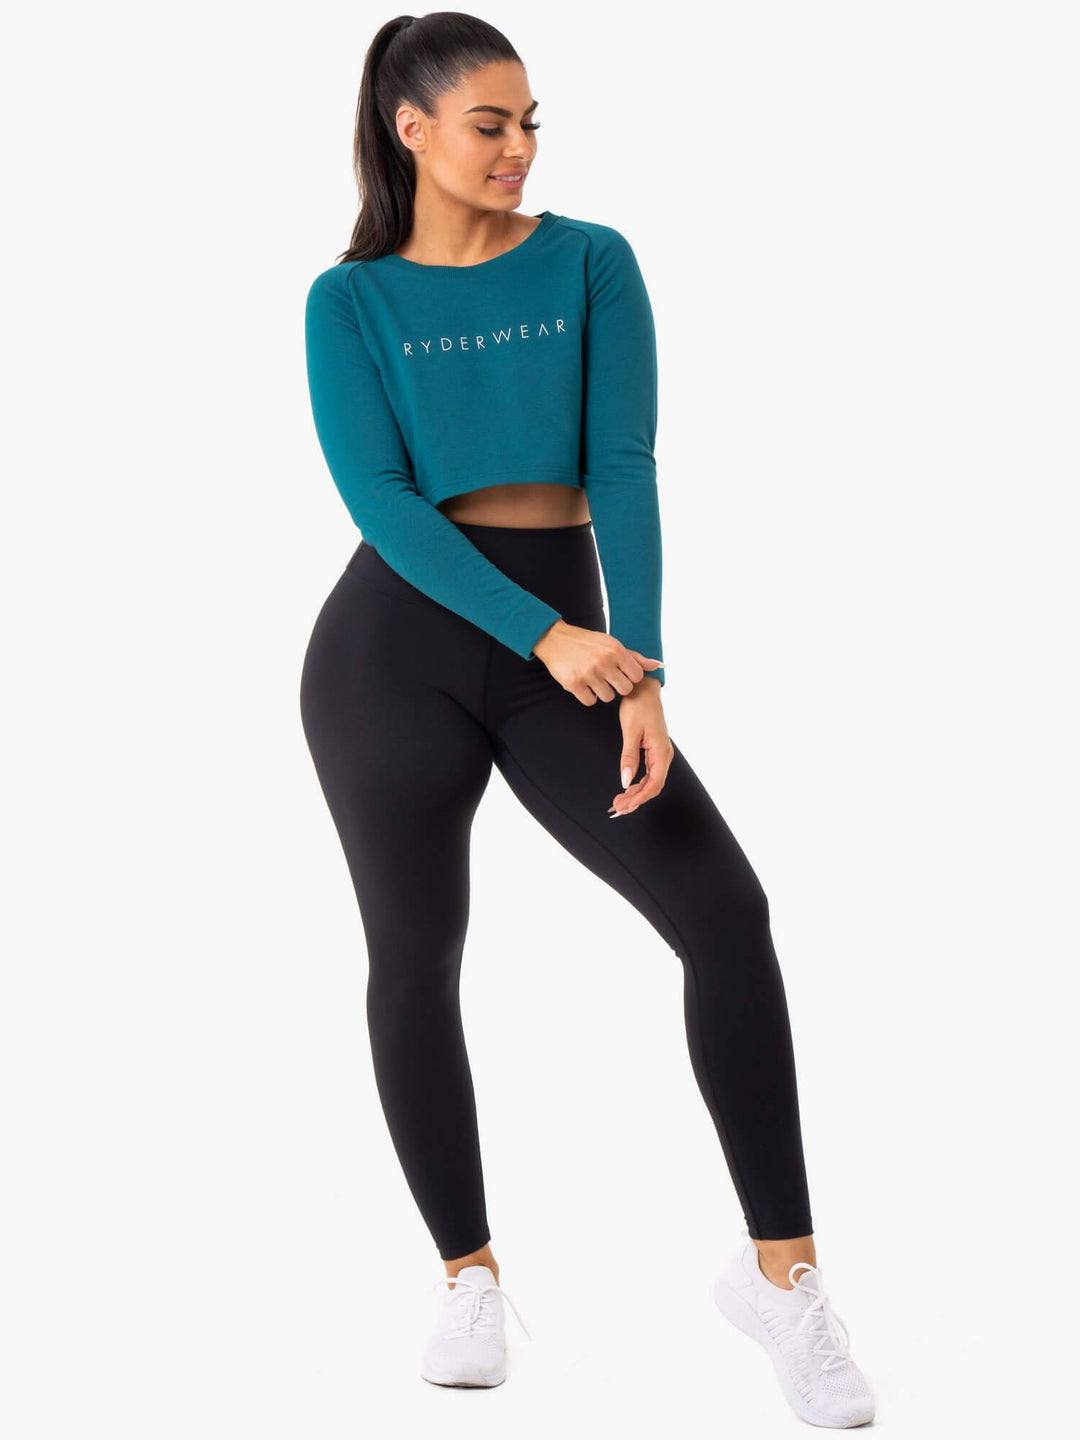 Staples Cropped Sweater - Emerald Clothing Ryderwear 